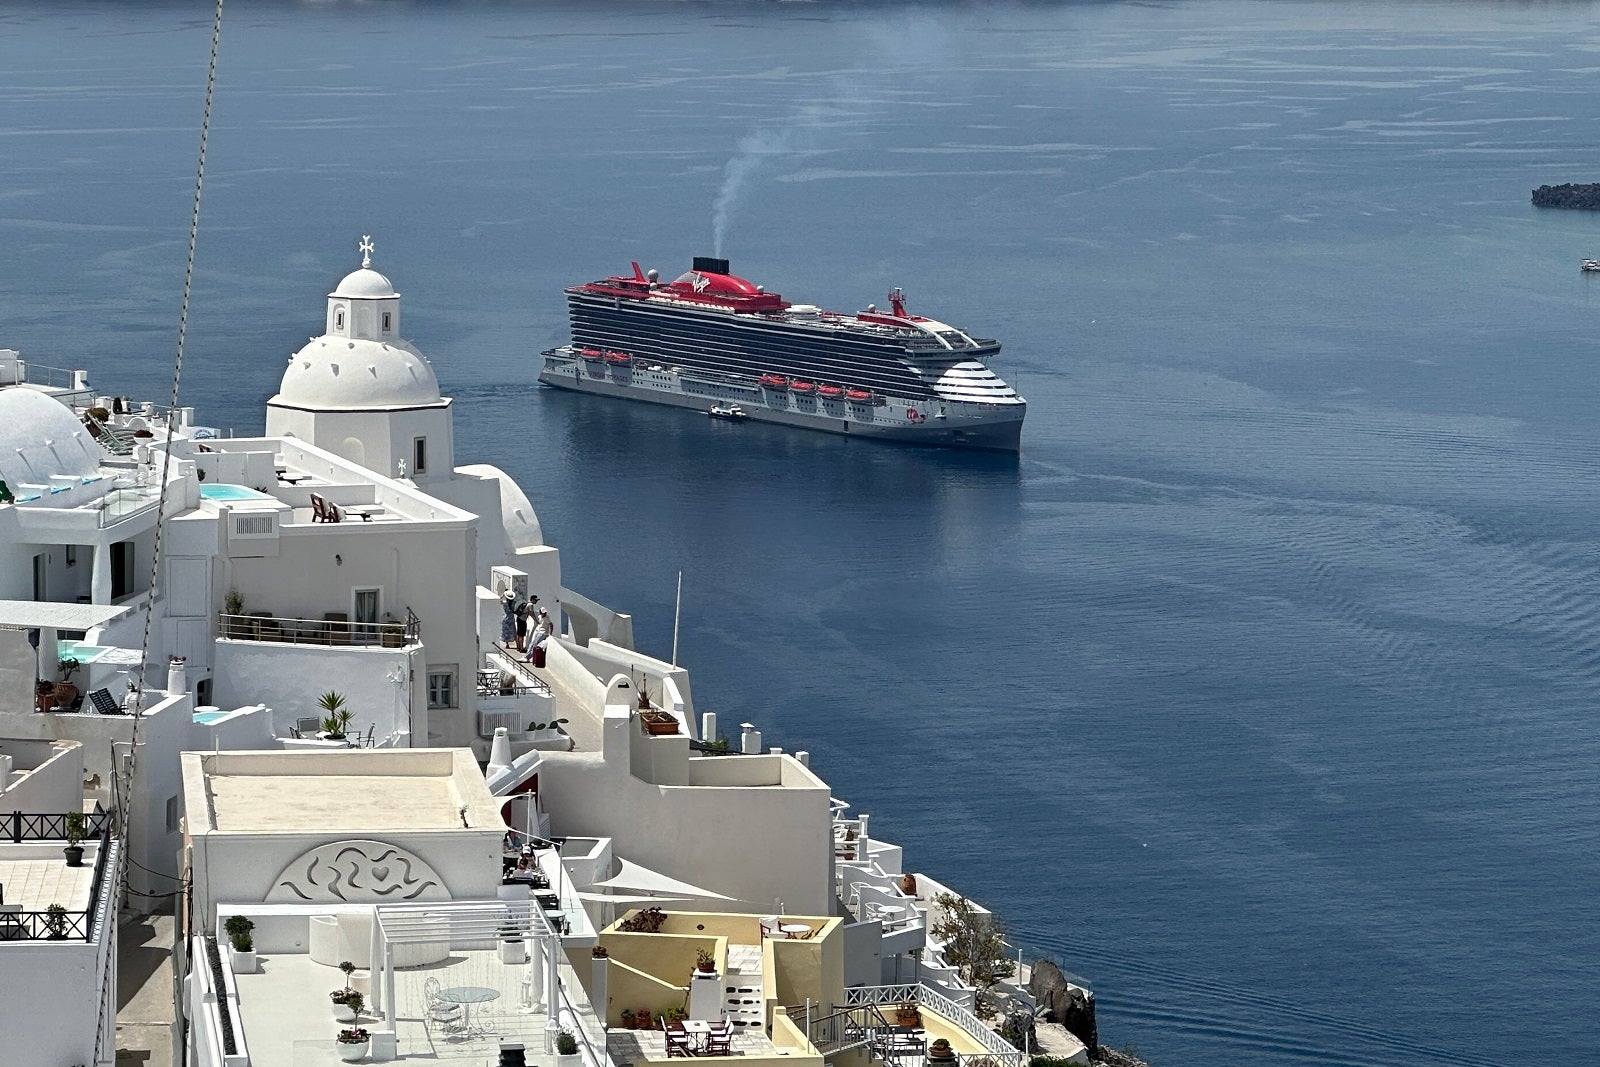 Virgin Voyages' Resilient Lady anchored off the shore of Santorini, Greece, with white buildings in the foreground